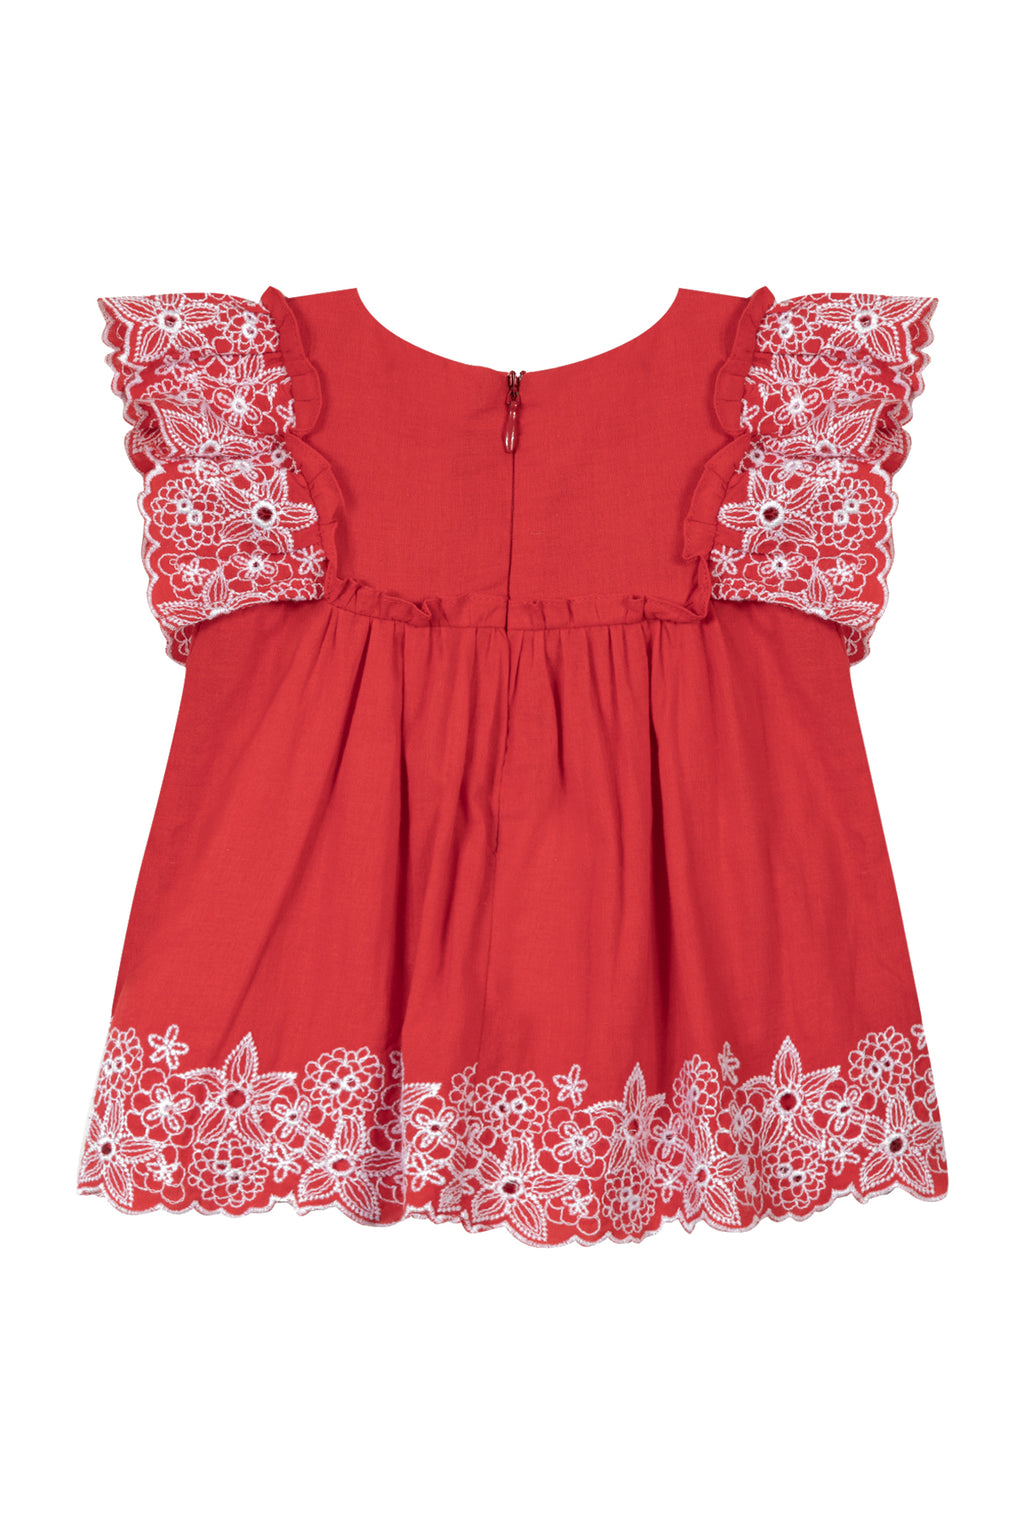 Blouse - Coquelicot Floral Embroidery